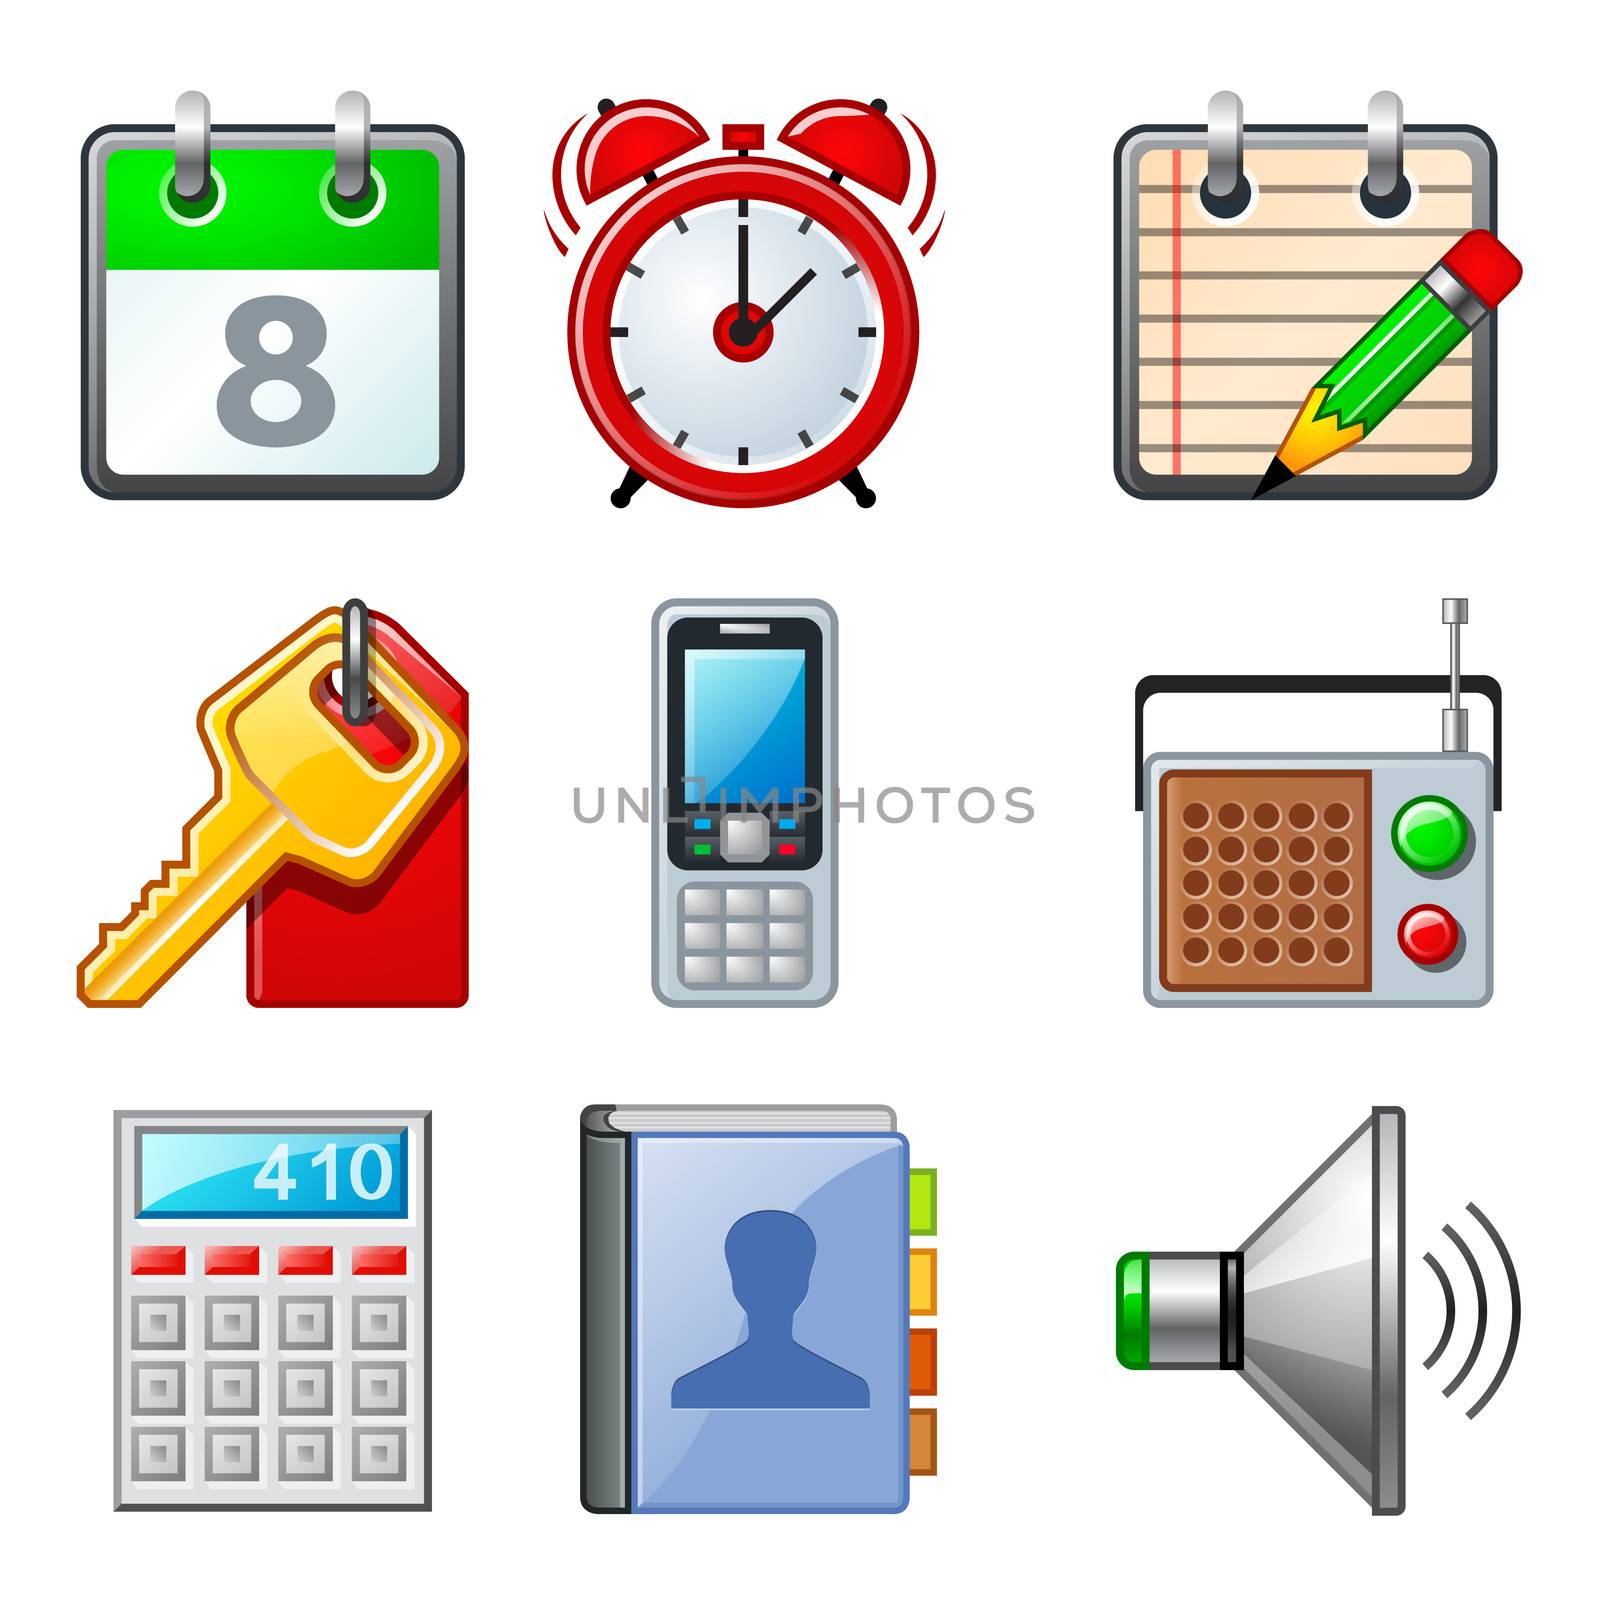 Icon set for popular mobile apps and phone functions. These icons are isolated on a white background. 